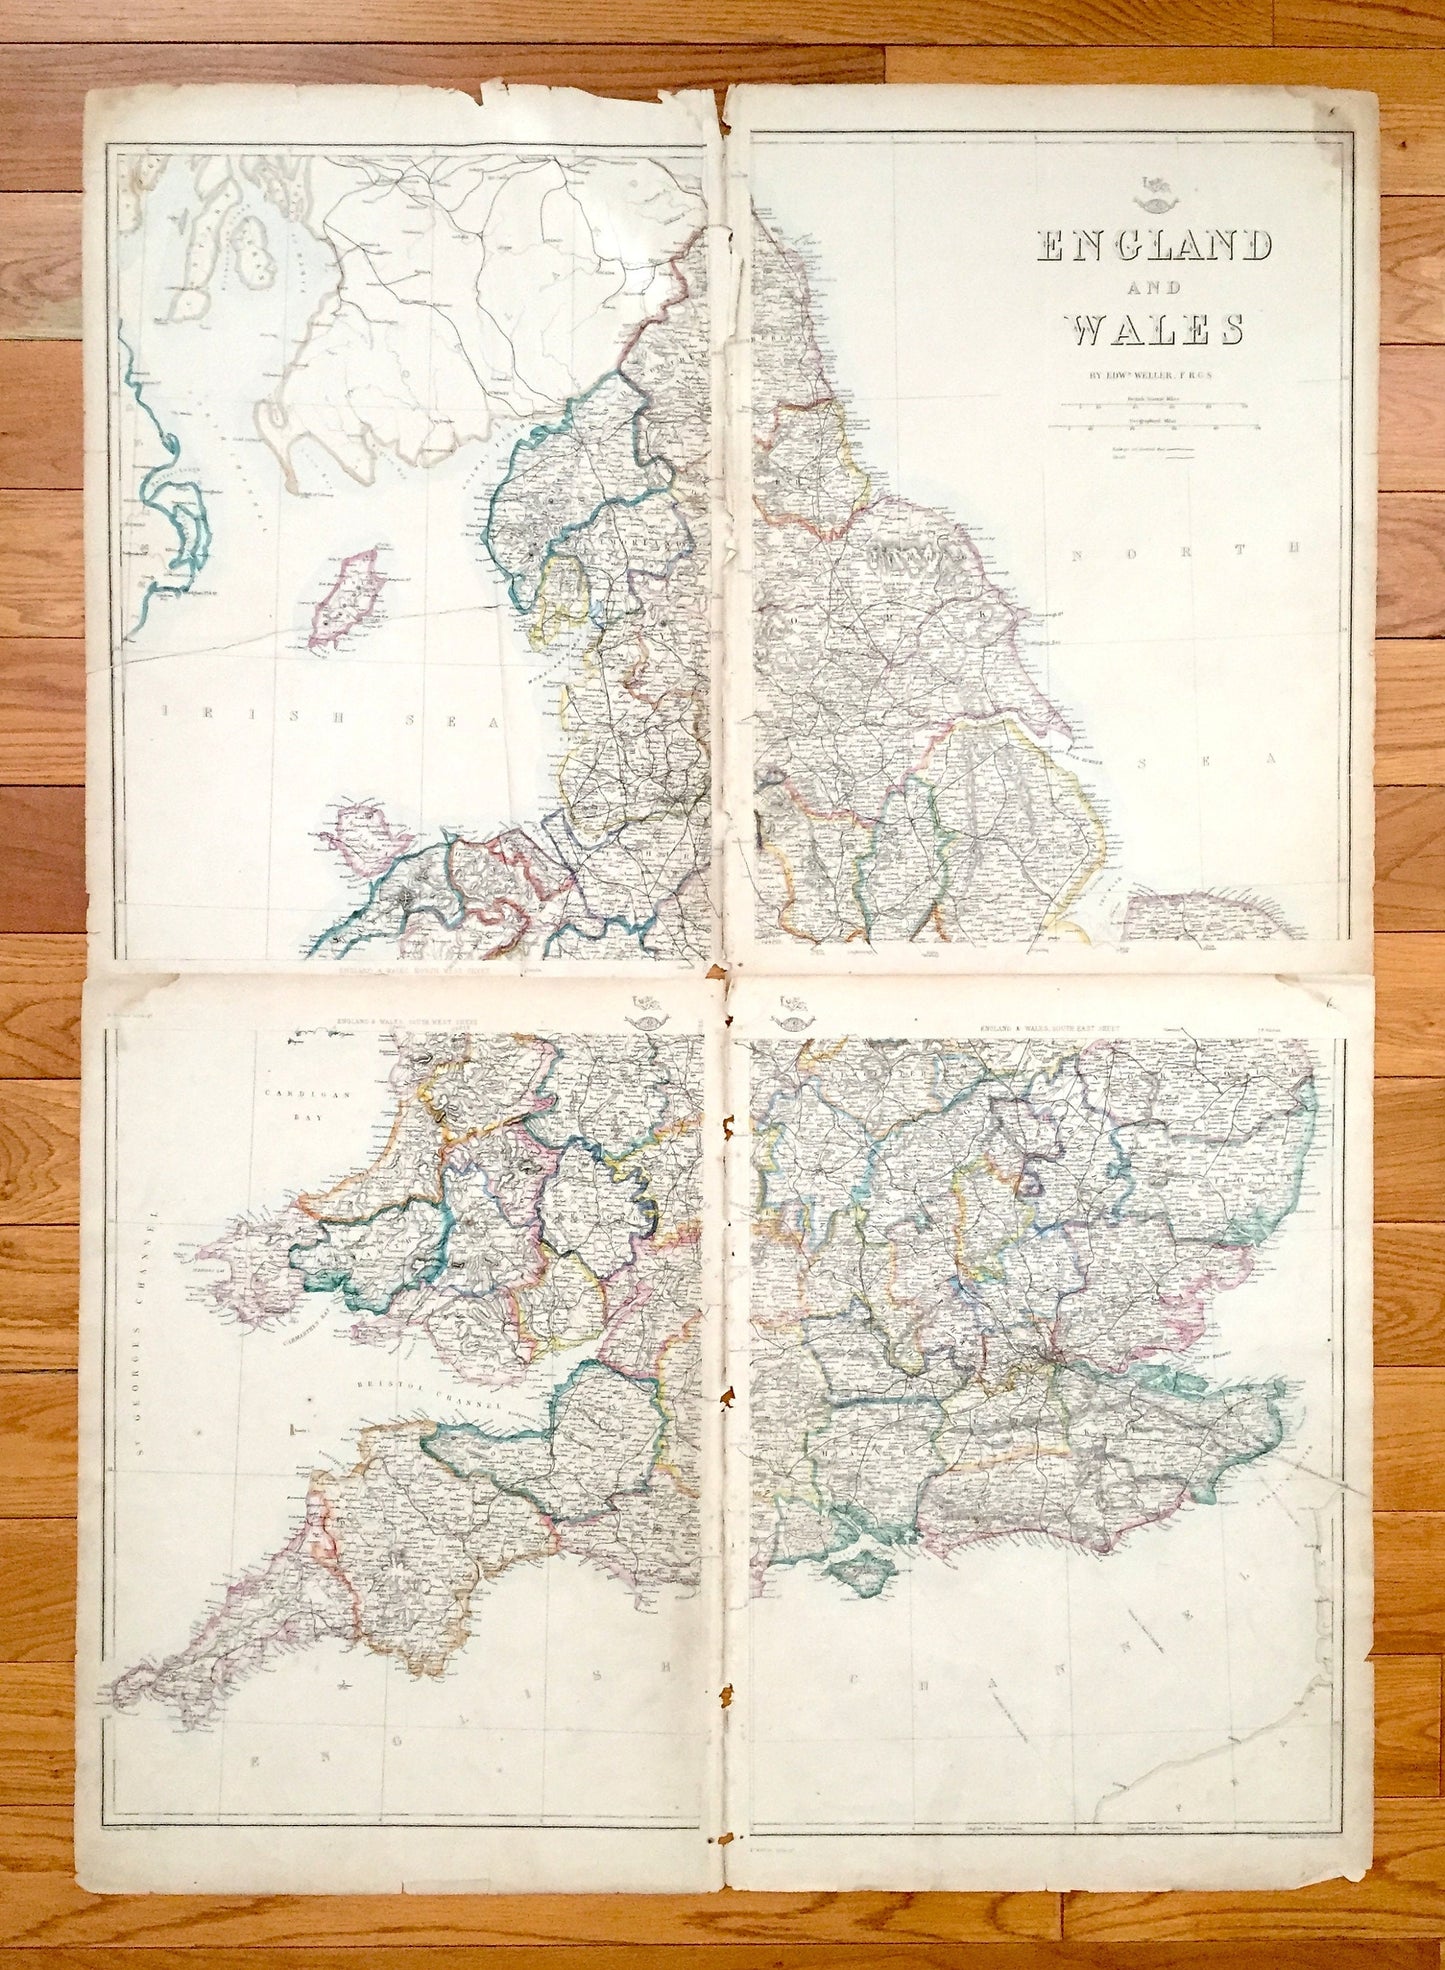 Antique 1863 England and Wales Map by Weller & Weekly Dispatch – Scotland, Ireland, Isle of Man, London, Cornwall Sussex Brighton Glasgow UK